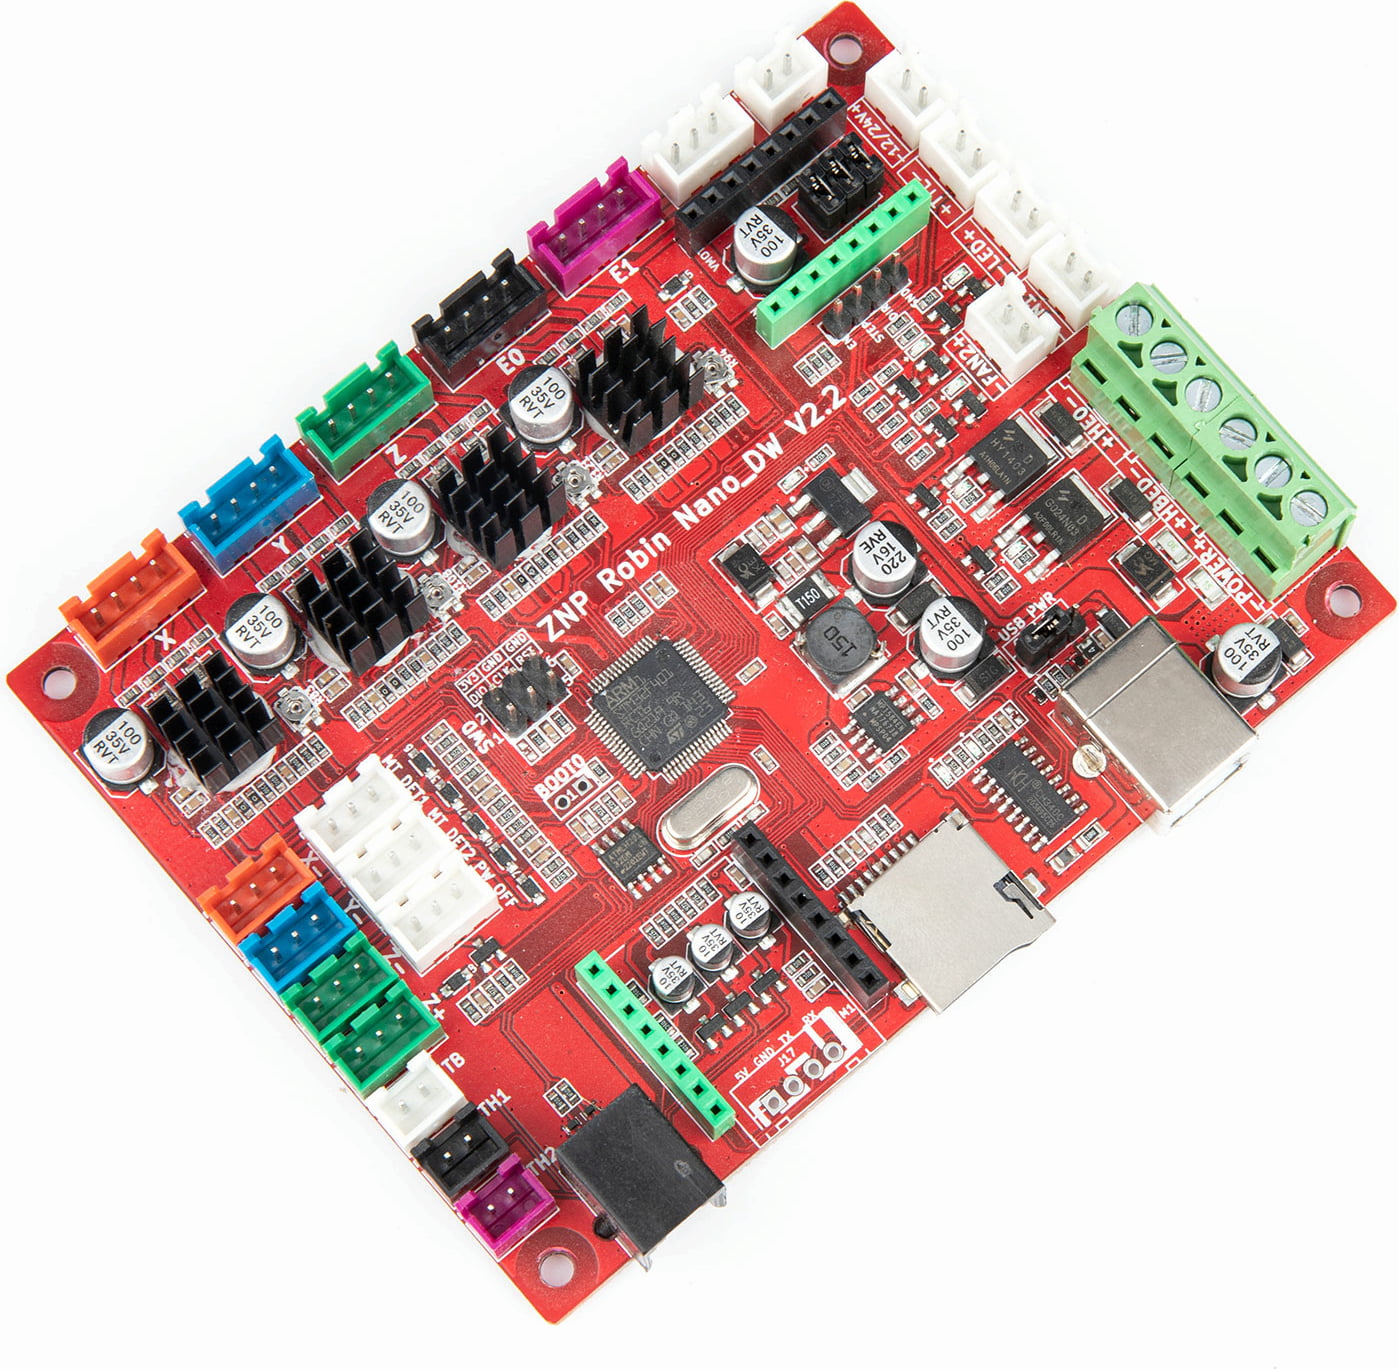 Mainboard for Neptunes 3 Pro / Plus / Max